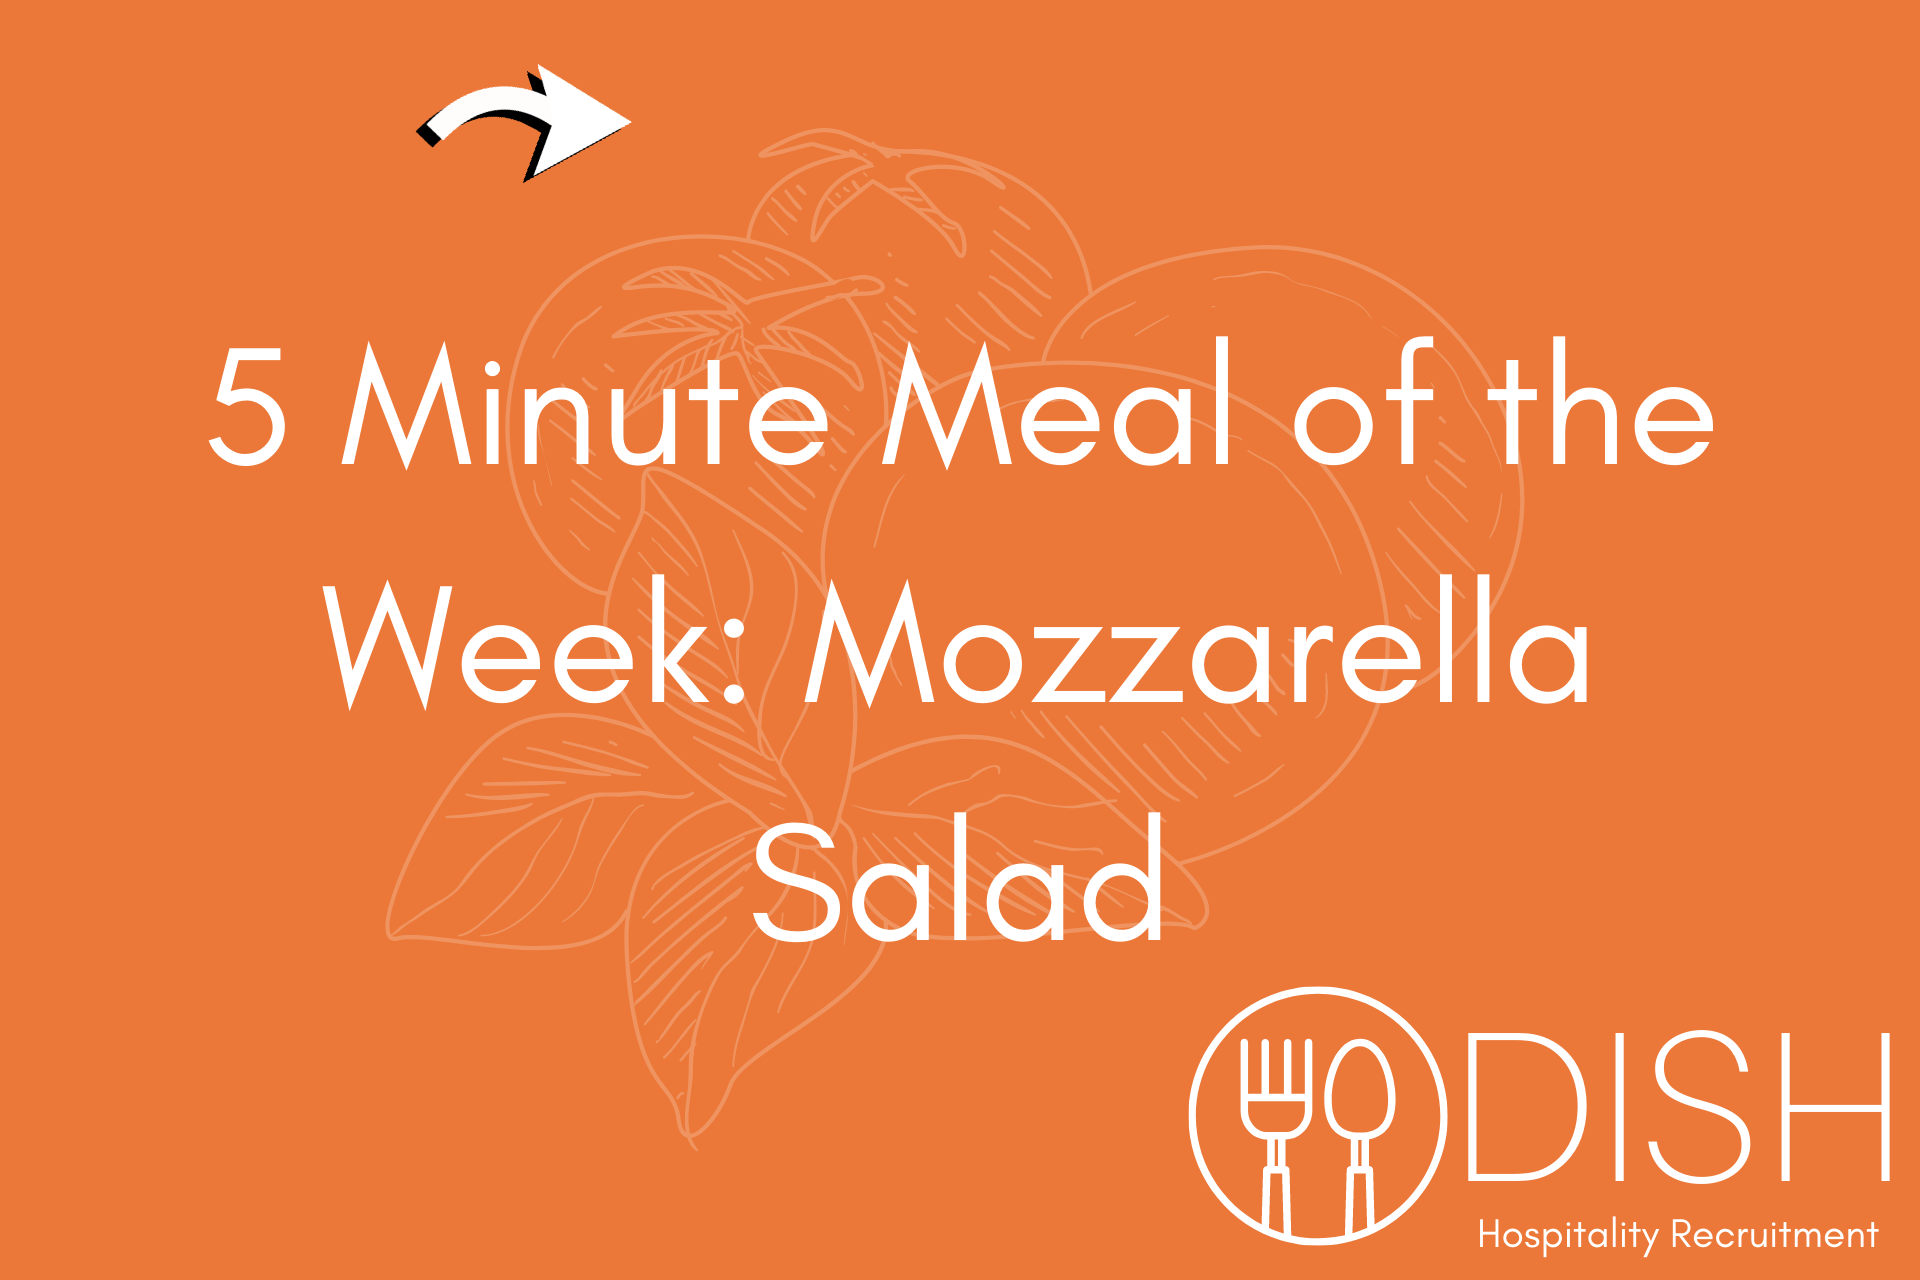 5 Minute Meal of the Week: Mozzarella Salad